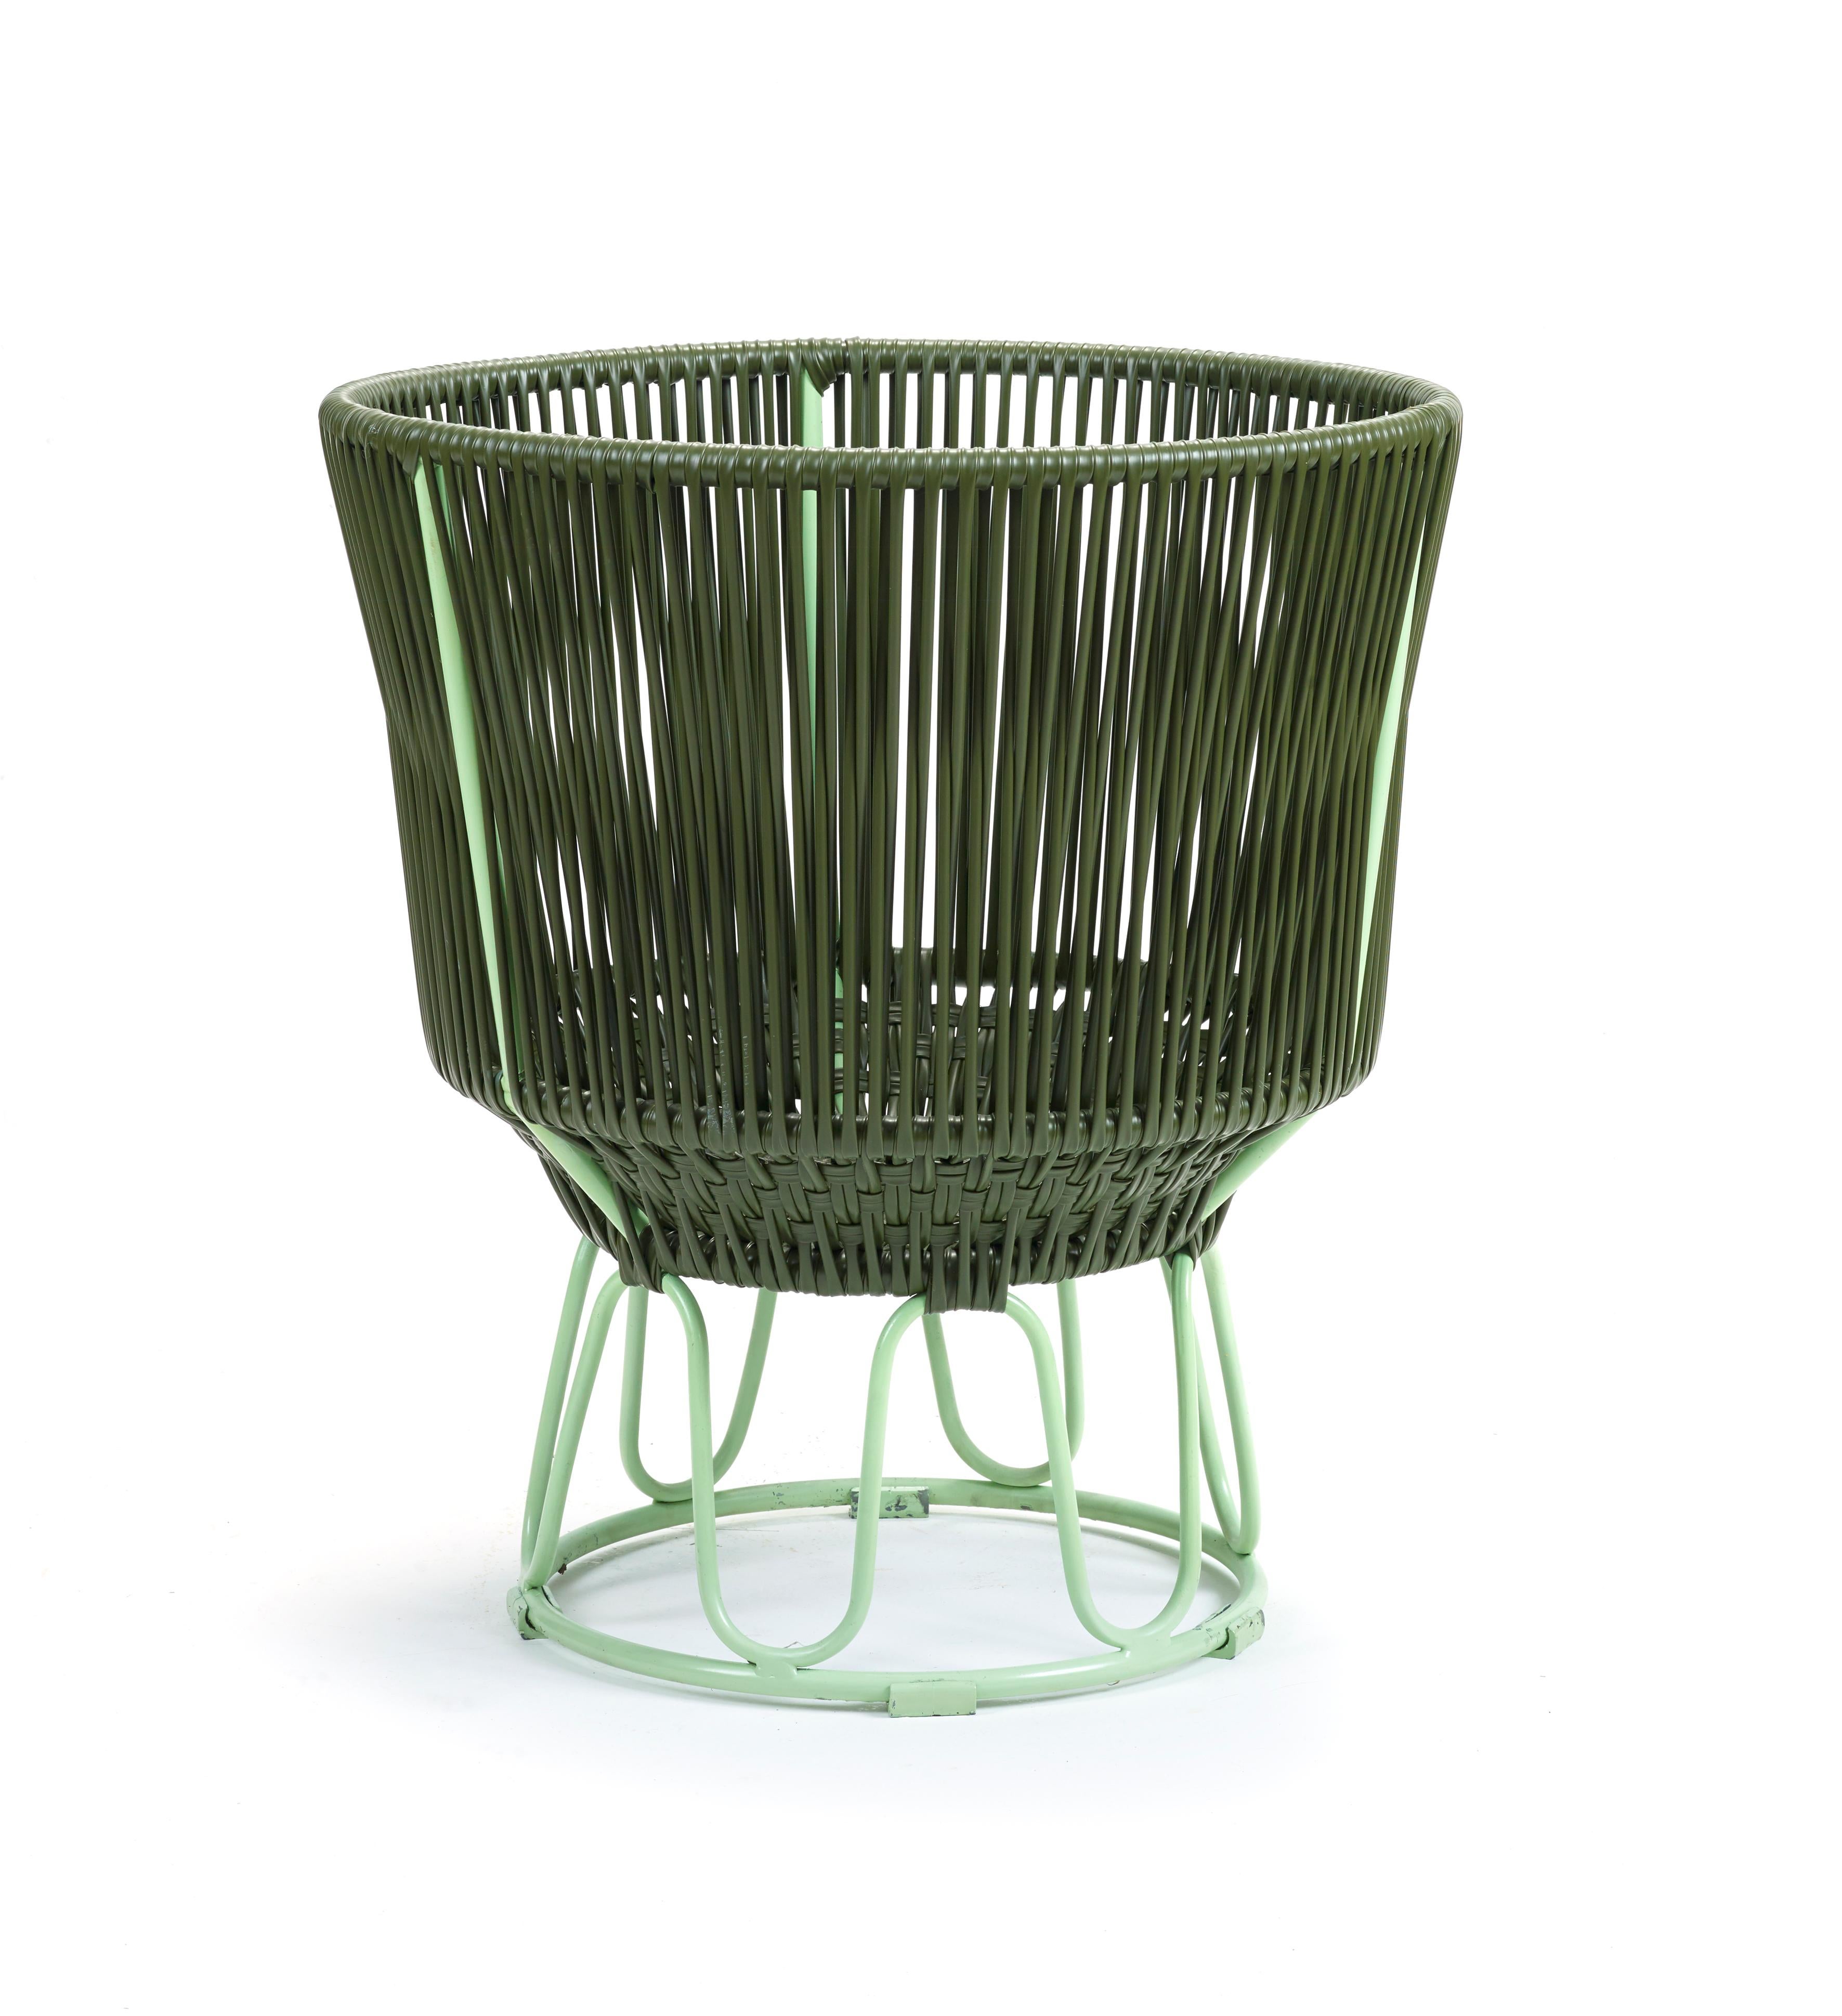 Olive Circo flower Pot 3 by Sebastian Herkner
Materials: Galvanized and powder-coated tubular steel. PVC strings.
Technique: Made from recycled plastic. Weaved by local craftspeople in Colombia. 
Dimensions: 
Top diameter 50 x H 56.5 cm 
Base